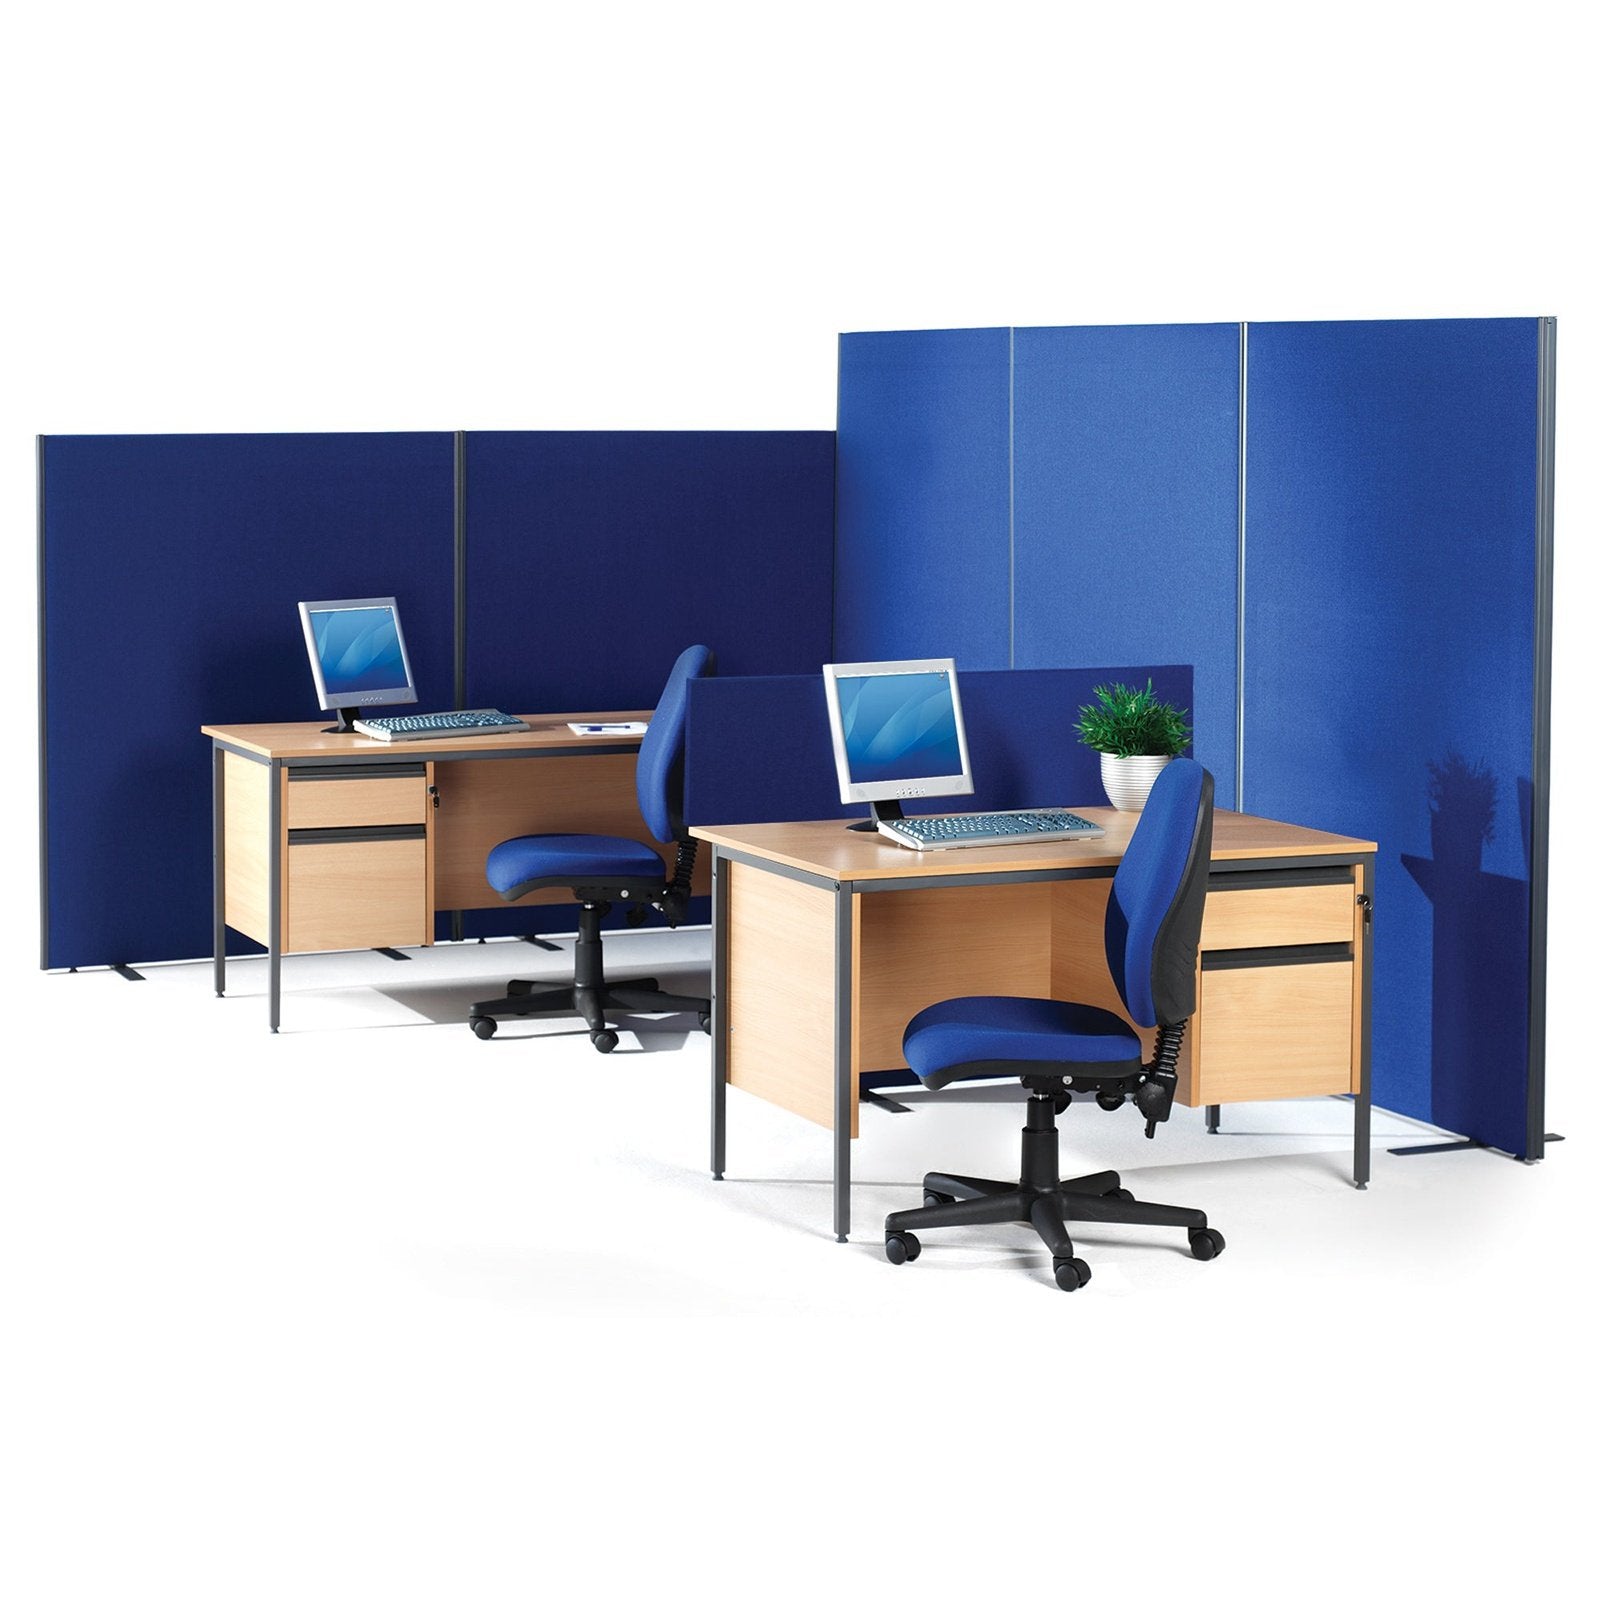 Floor standing fabric screen - Office Products Online